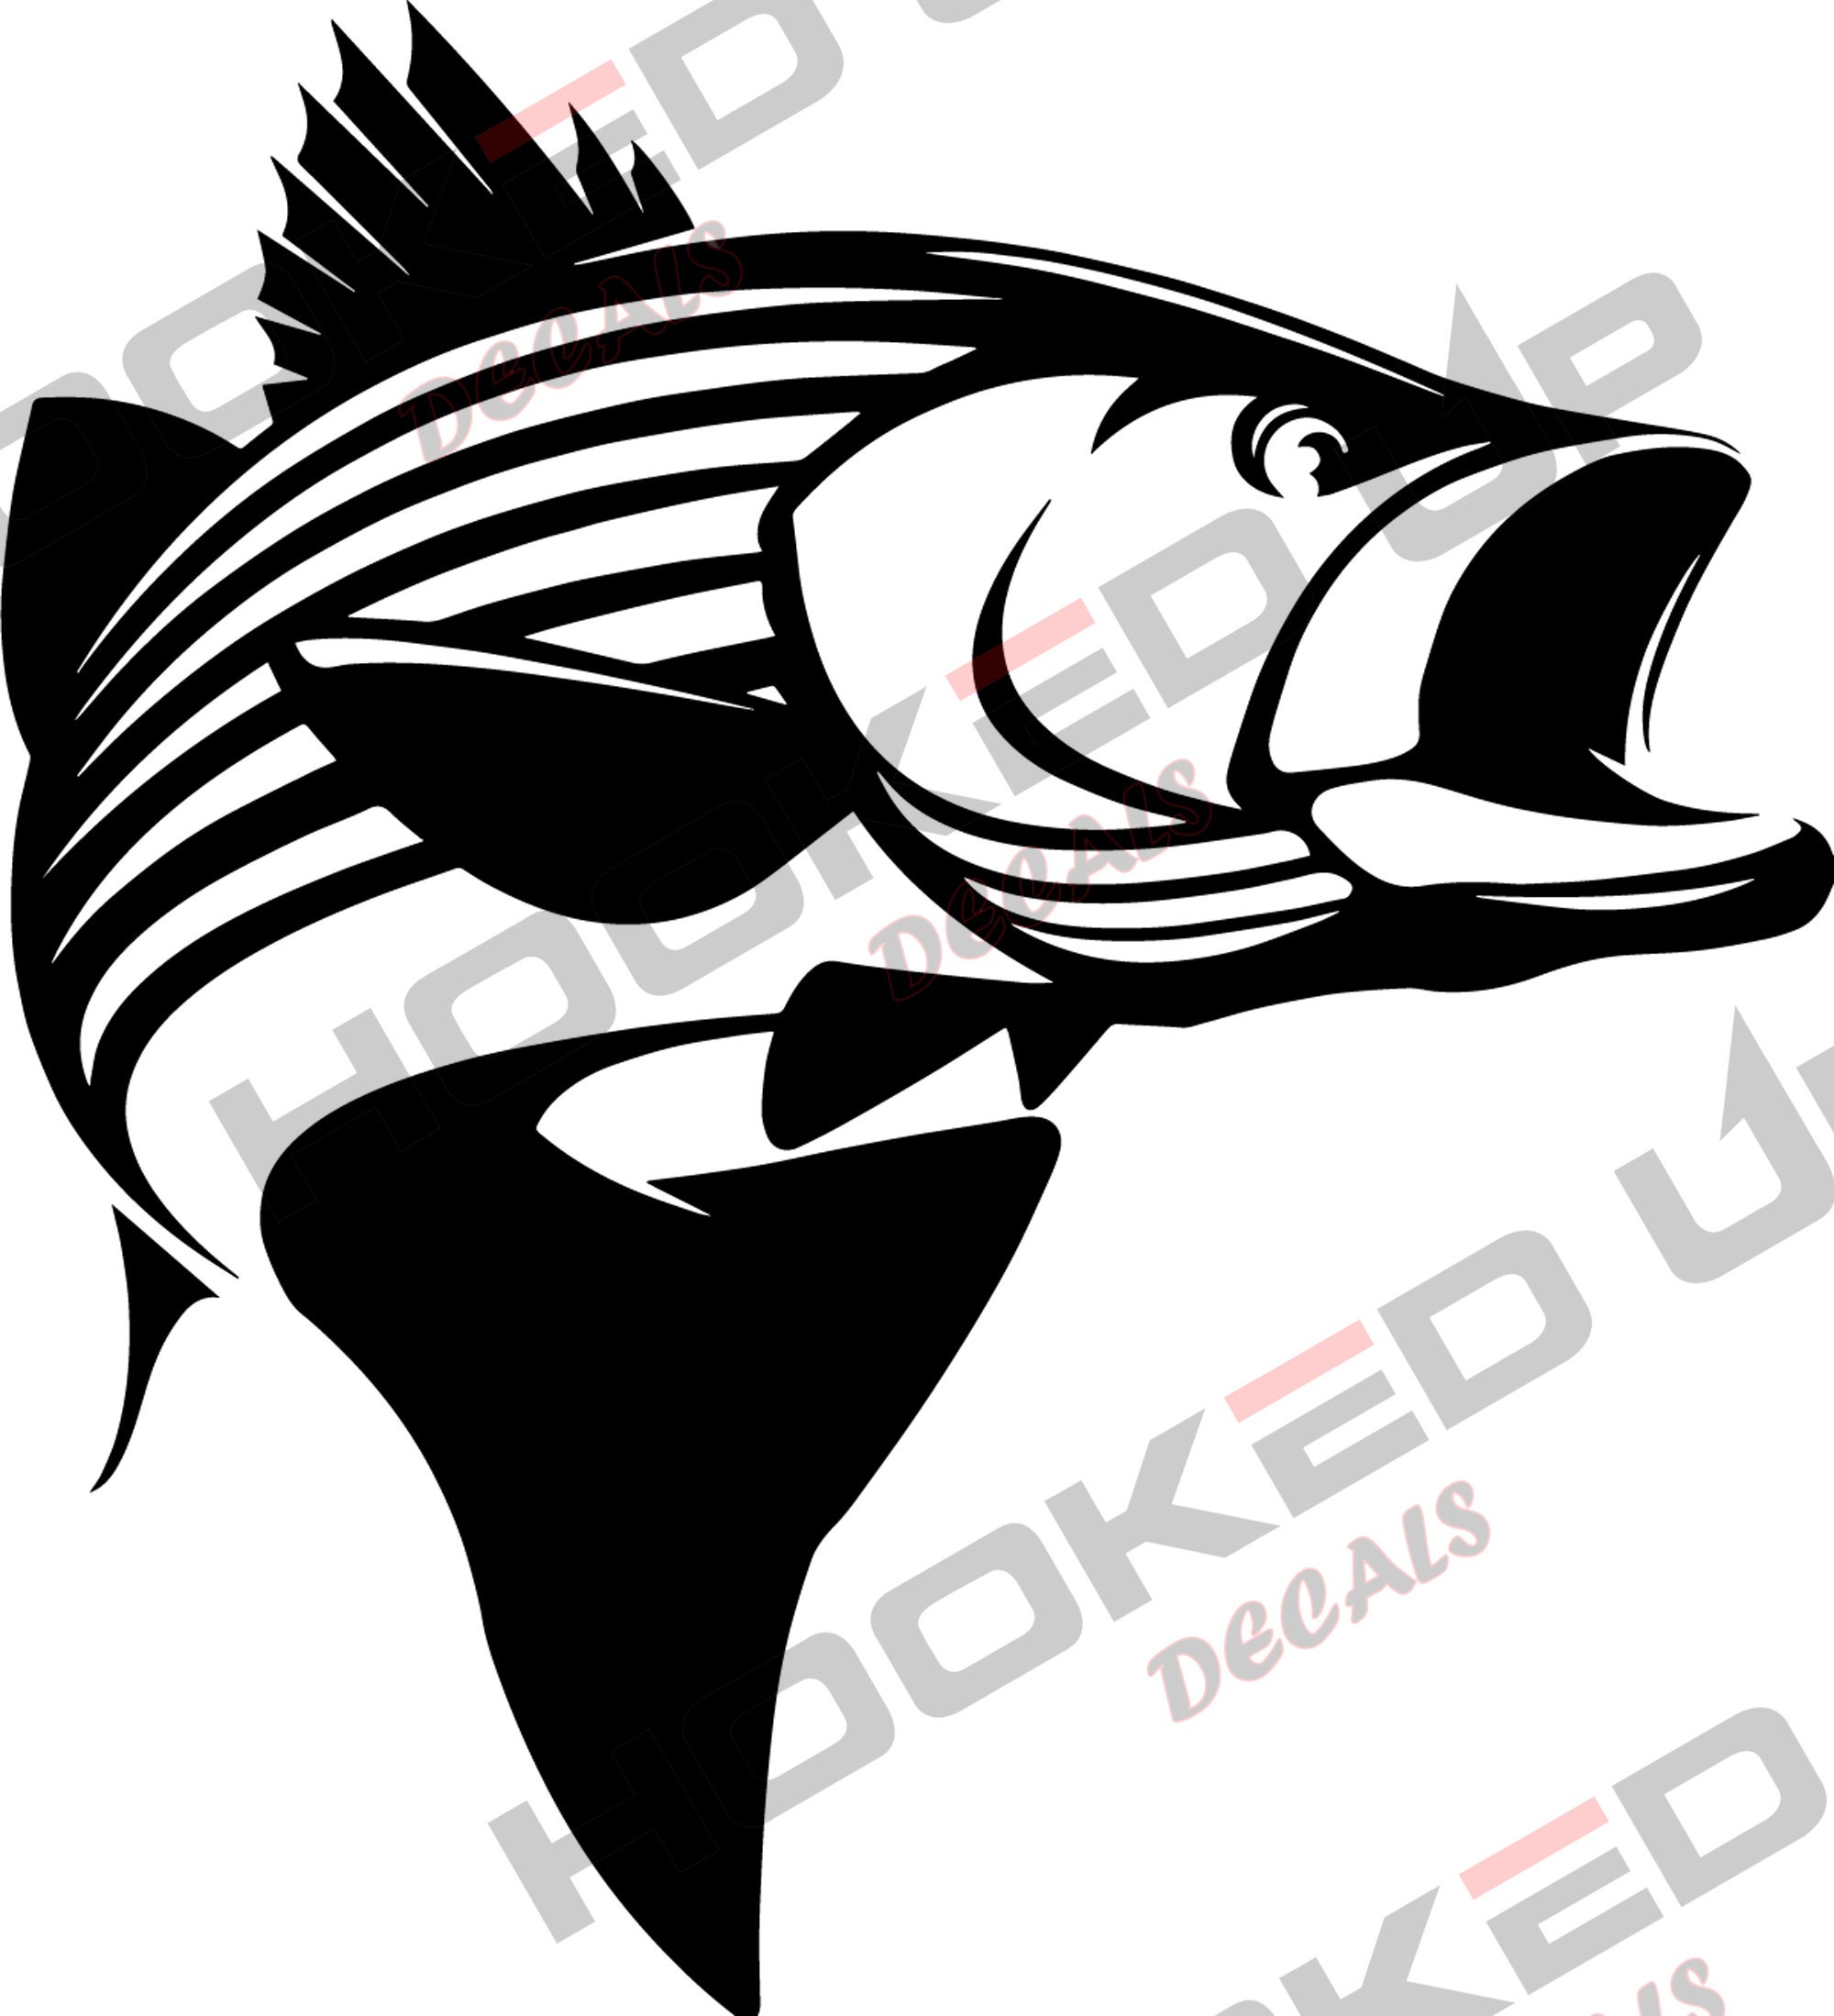 Striper Sticker Decal fly fishing glossy weather proof Striped Bass 4 1/2  x 4